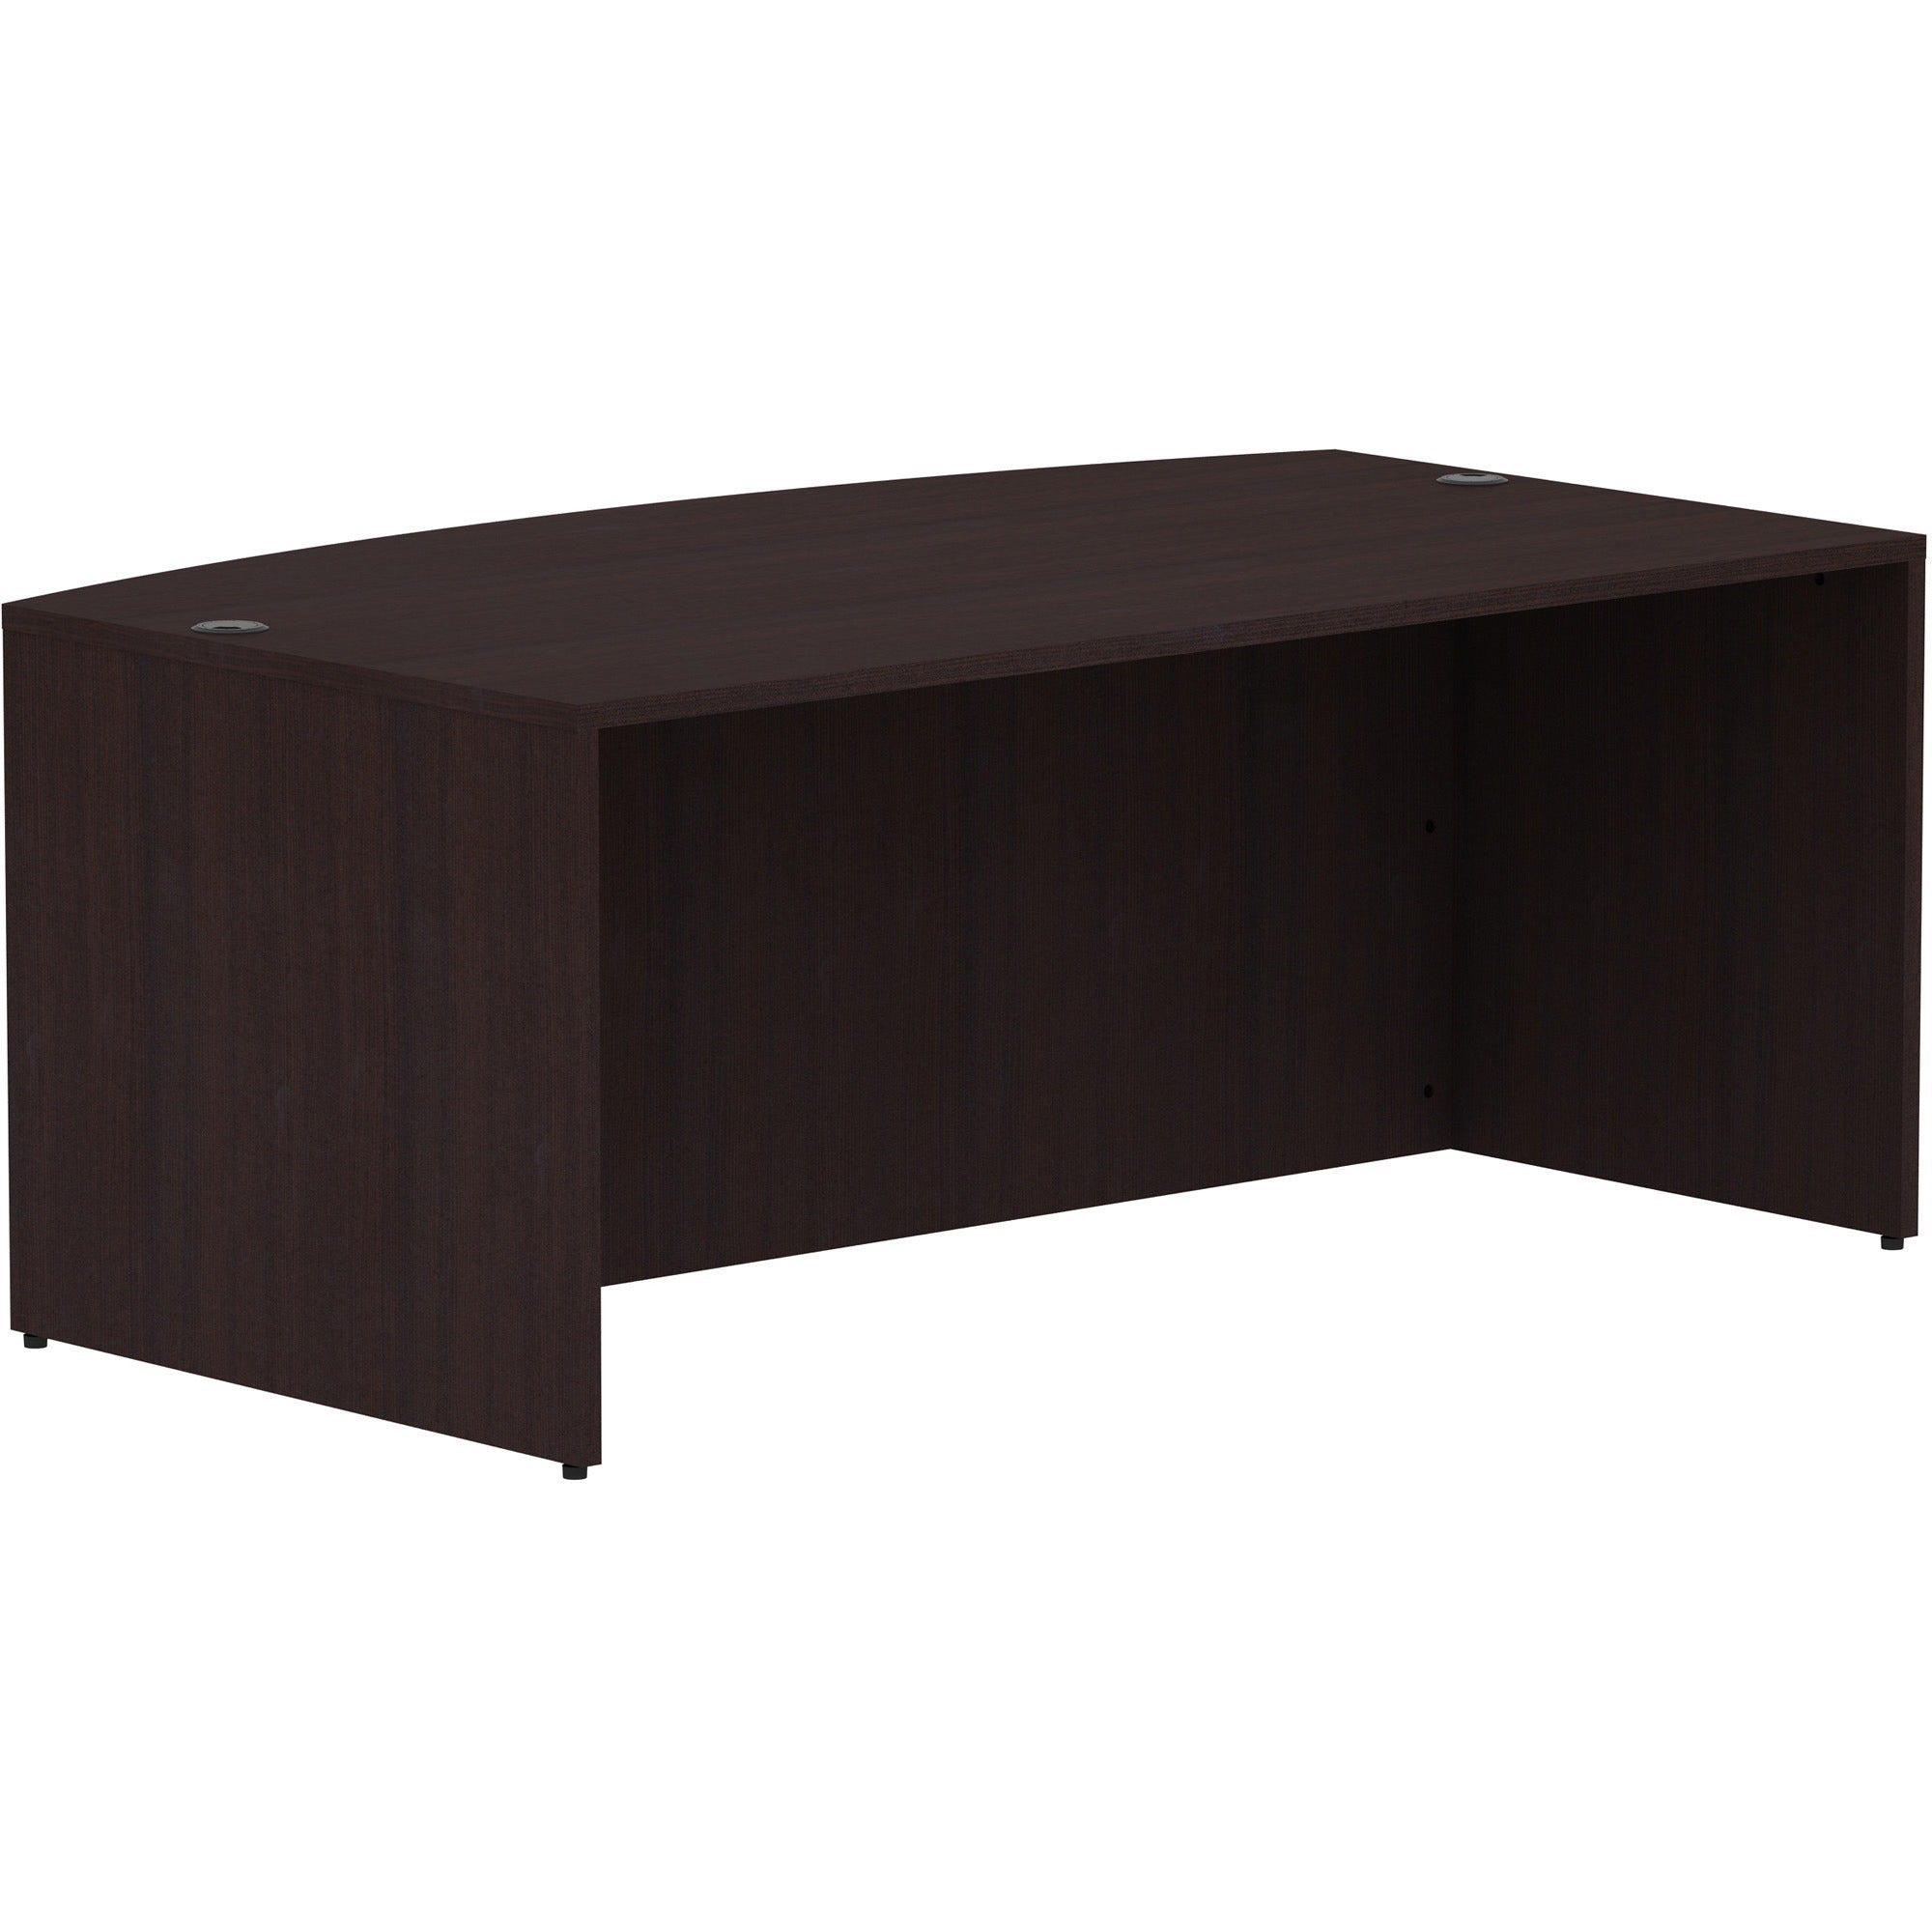 lorell-essentials-series-bowfront-desk-shell-72-x-414295-desk-shell-1-top-bow-front-edge-finish-espresso-laminate_llr18260 - 1